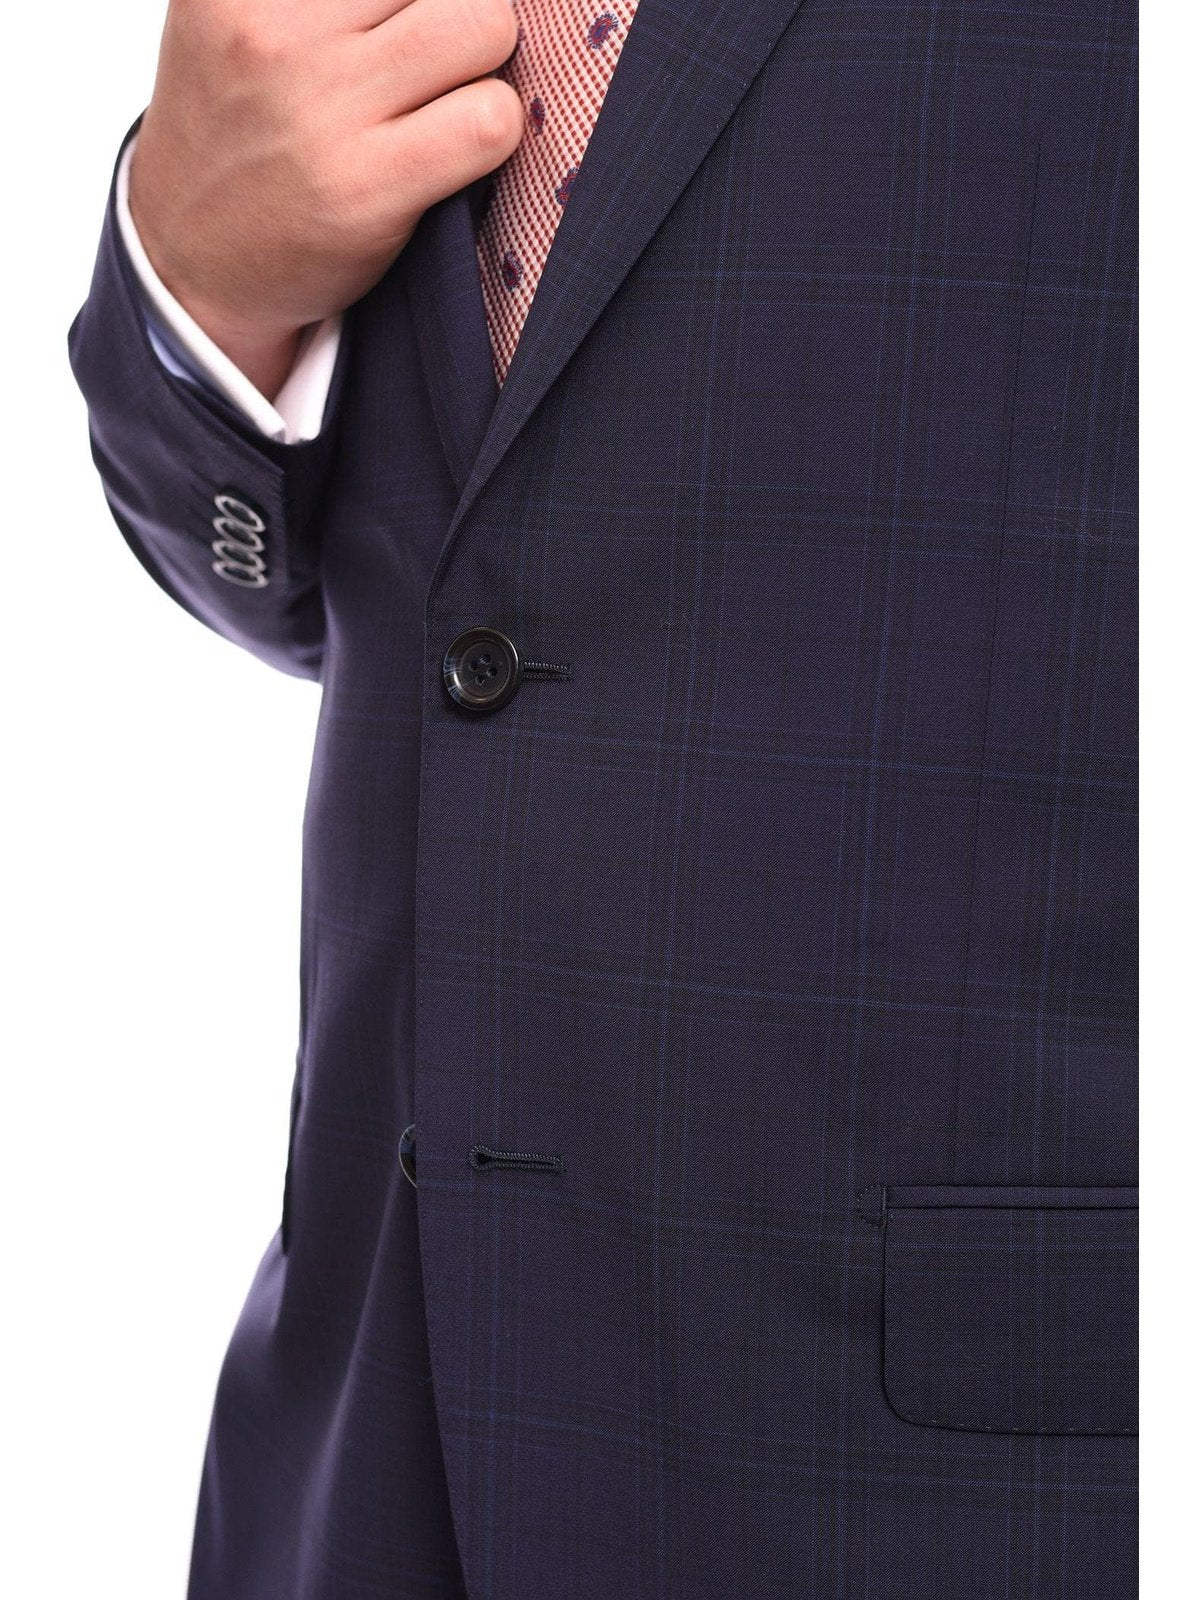 Napoli TWO PIECE SUITS Napoli Classic Fit Blue Plaid Windowpane Two Button Half Canvassed Wool Suit